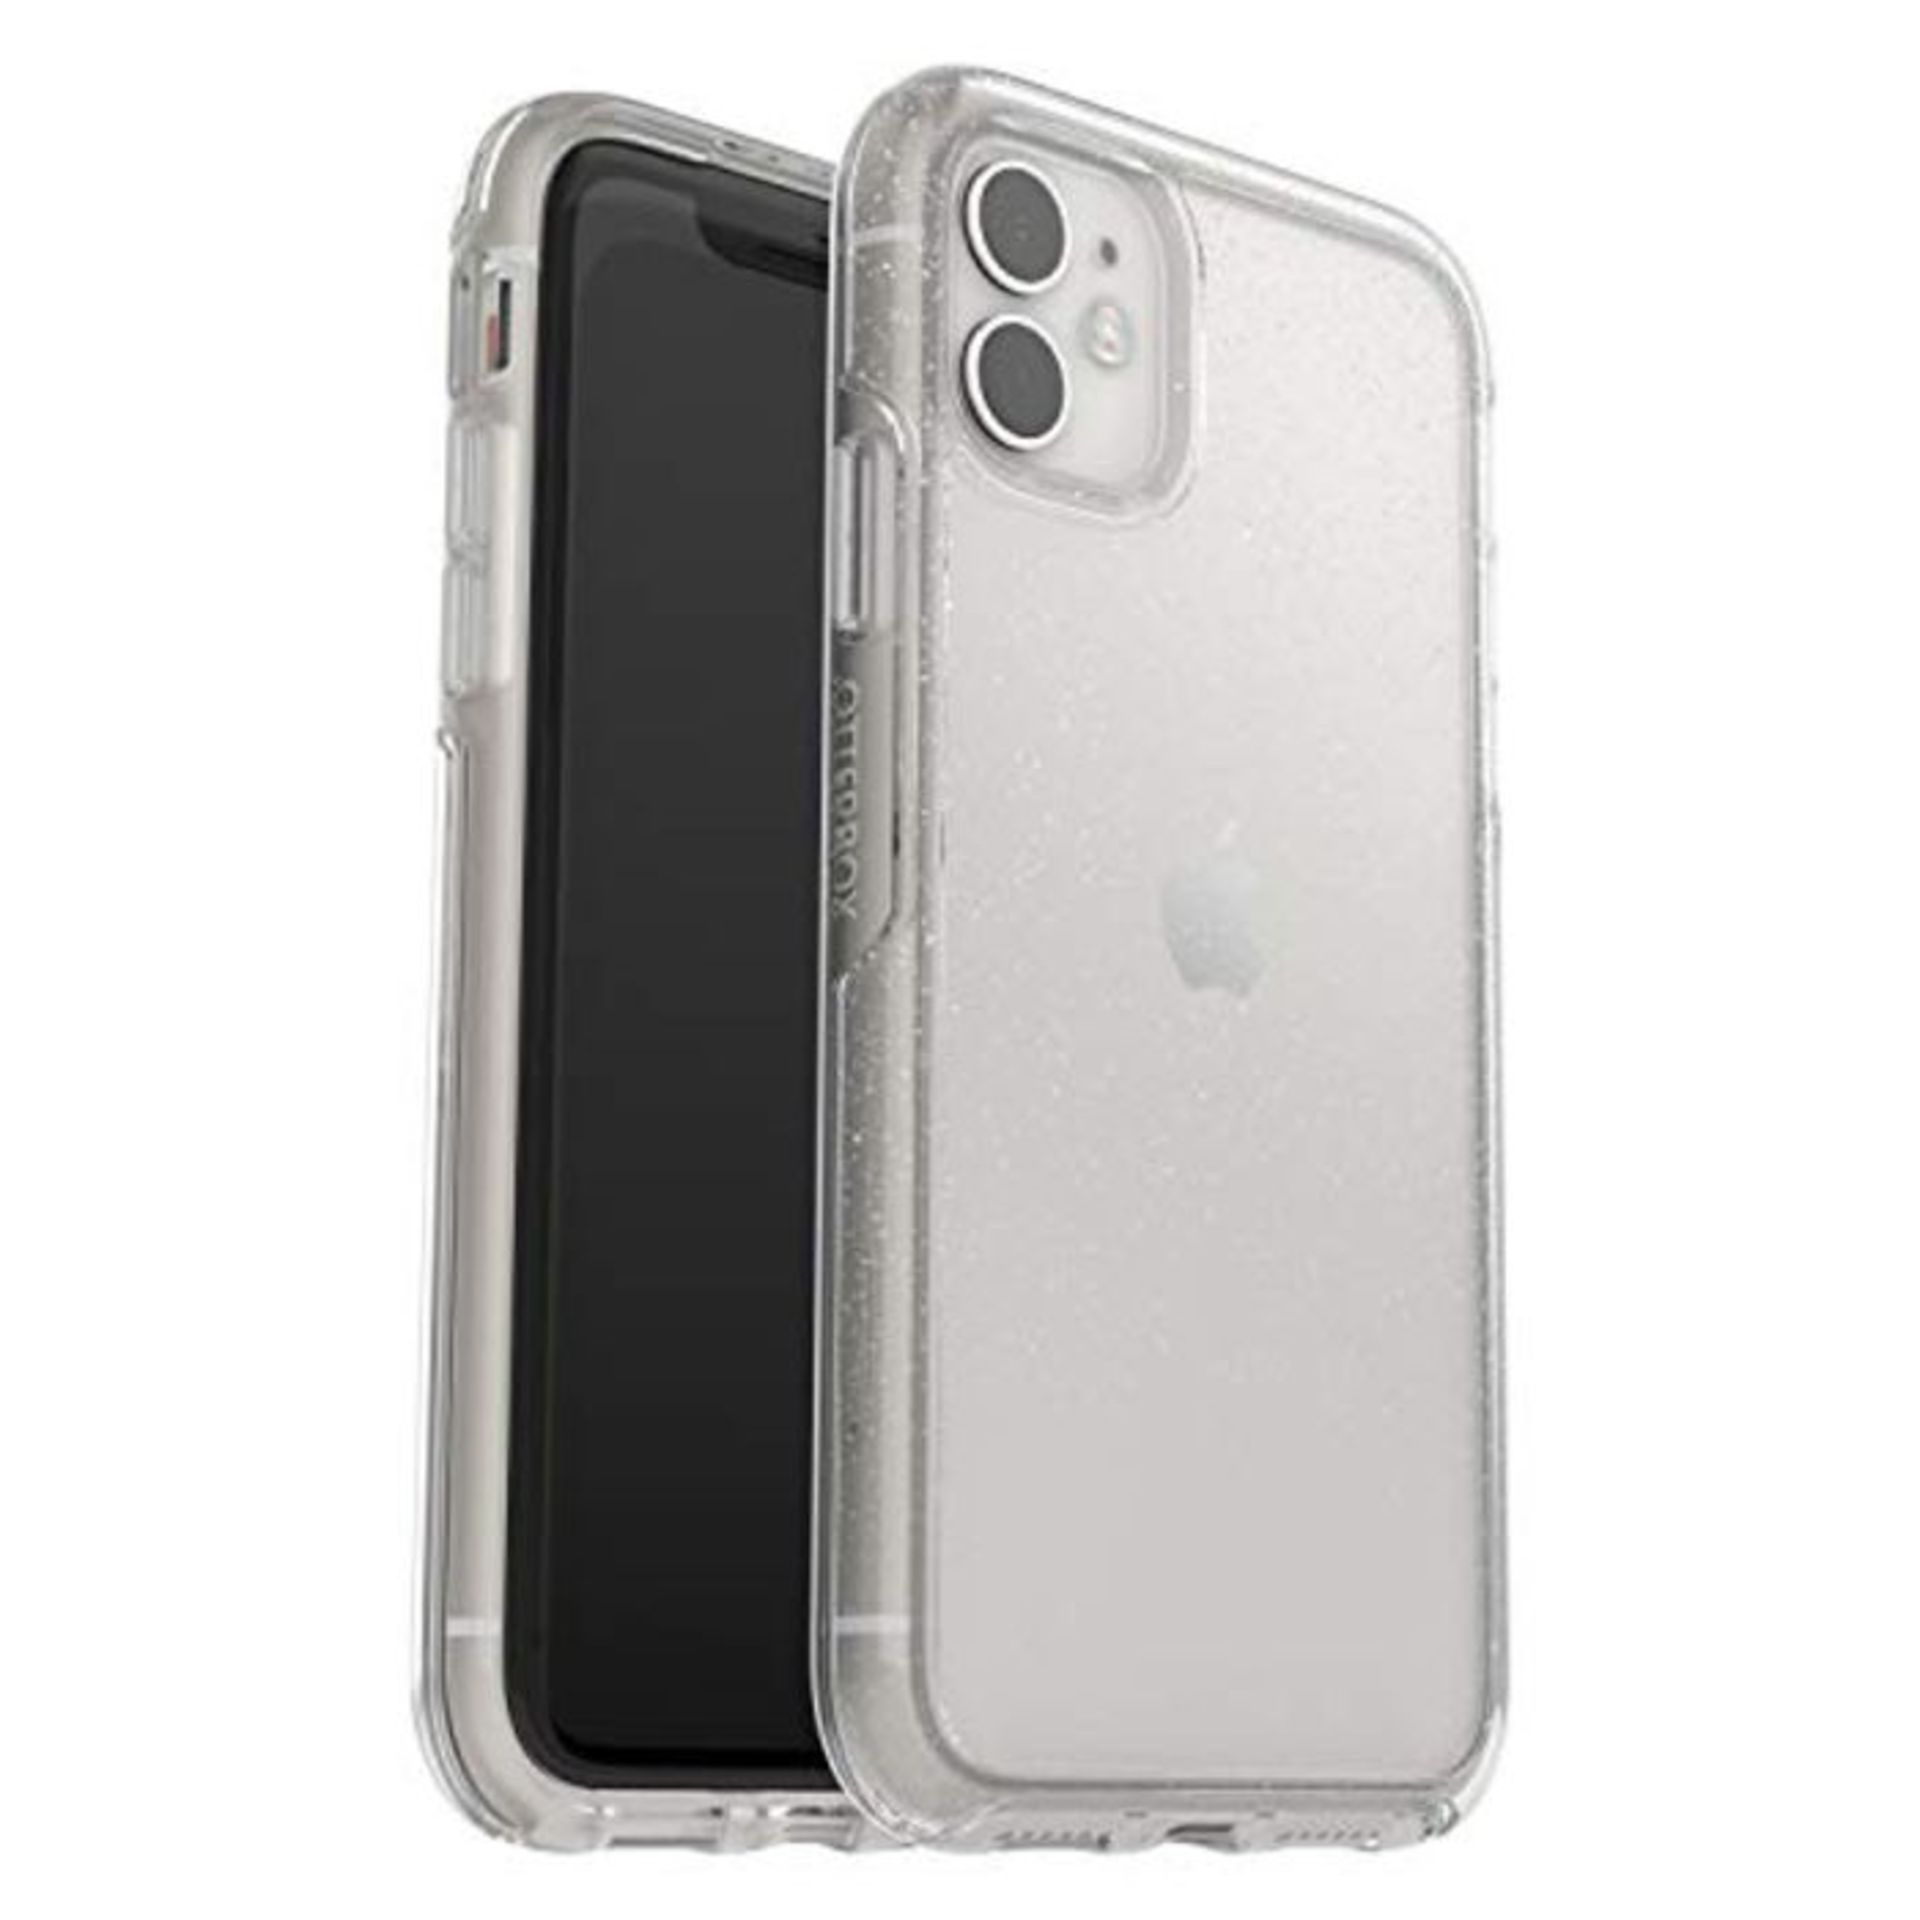 OtterBox for Apple iPhone 11, Sleek Drop Proof Protective Clear Case, Symmetry Clear S - Image 4 of 6